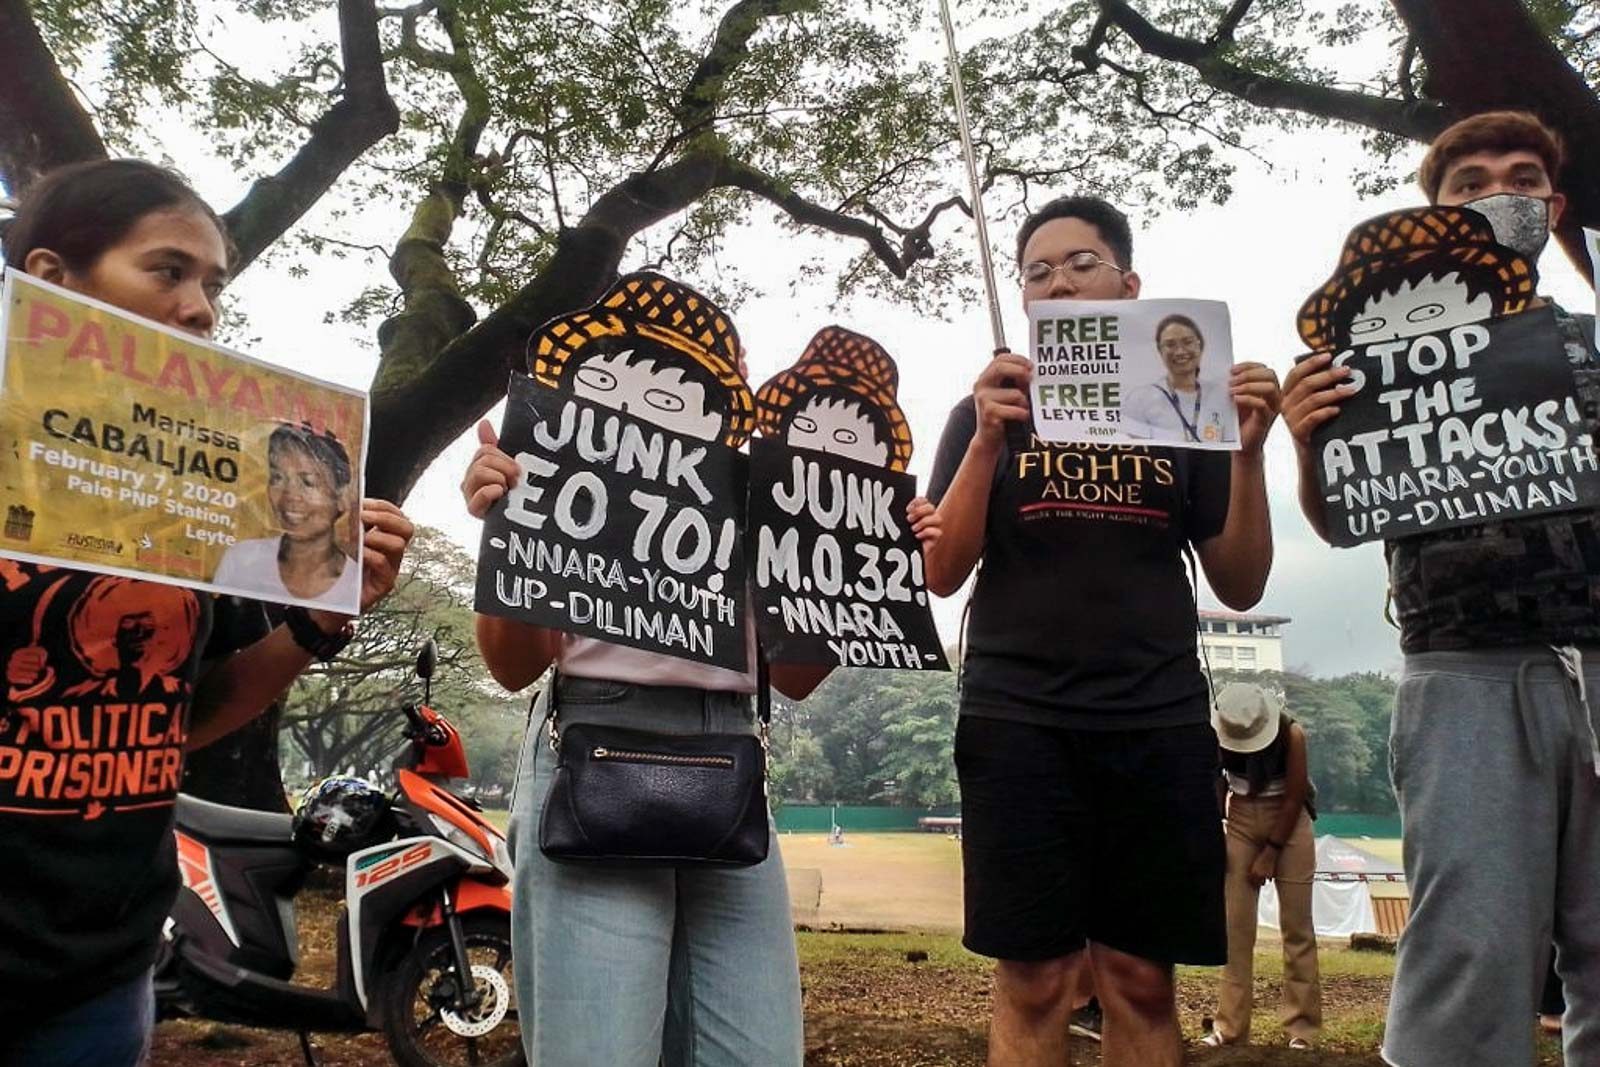 PROTEST. Progressive organizations and rights advocates gather at UP Diliman on February 7, 2020, to protest government's continuing crackdown on dissent. Photo courtesy of Karapatan Alliance Philippines  